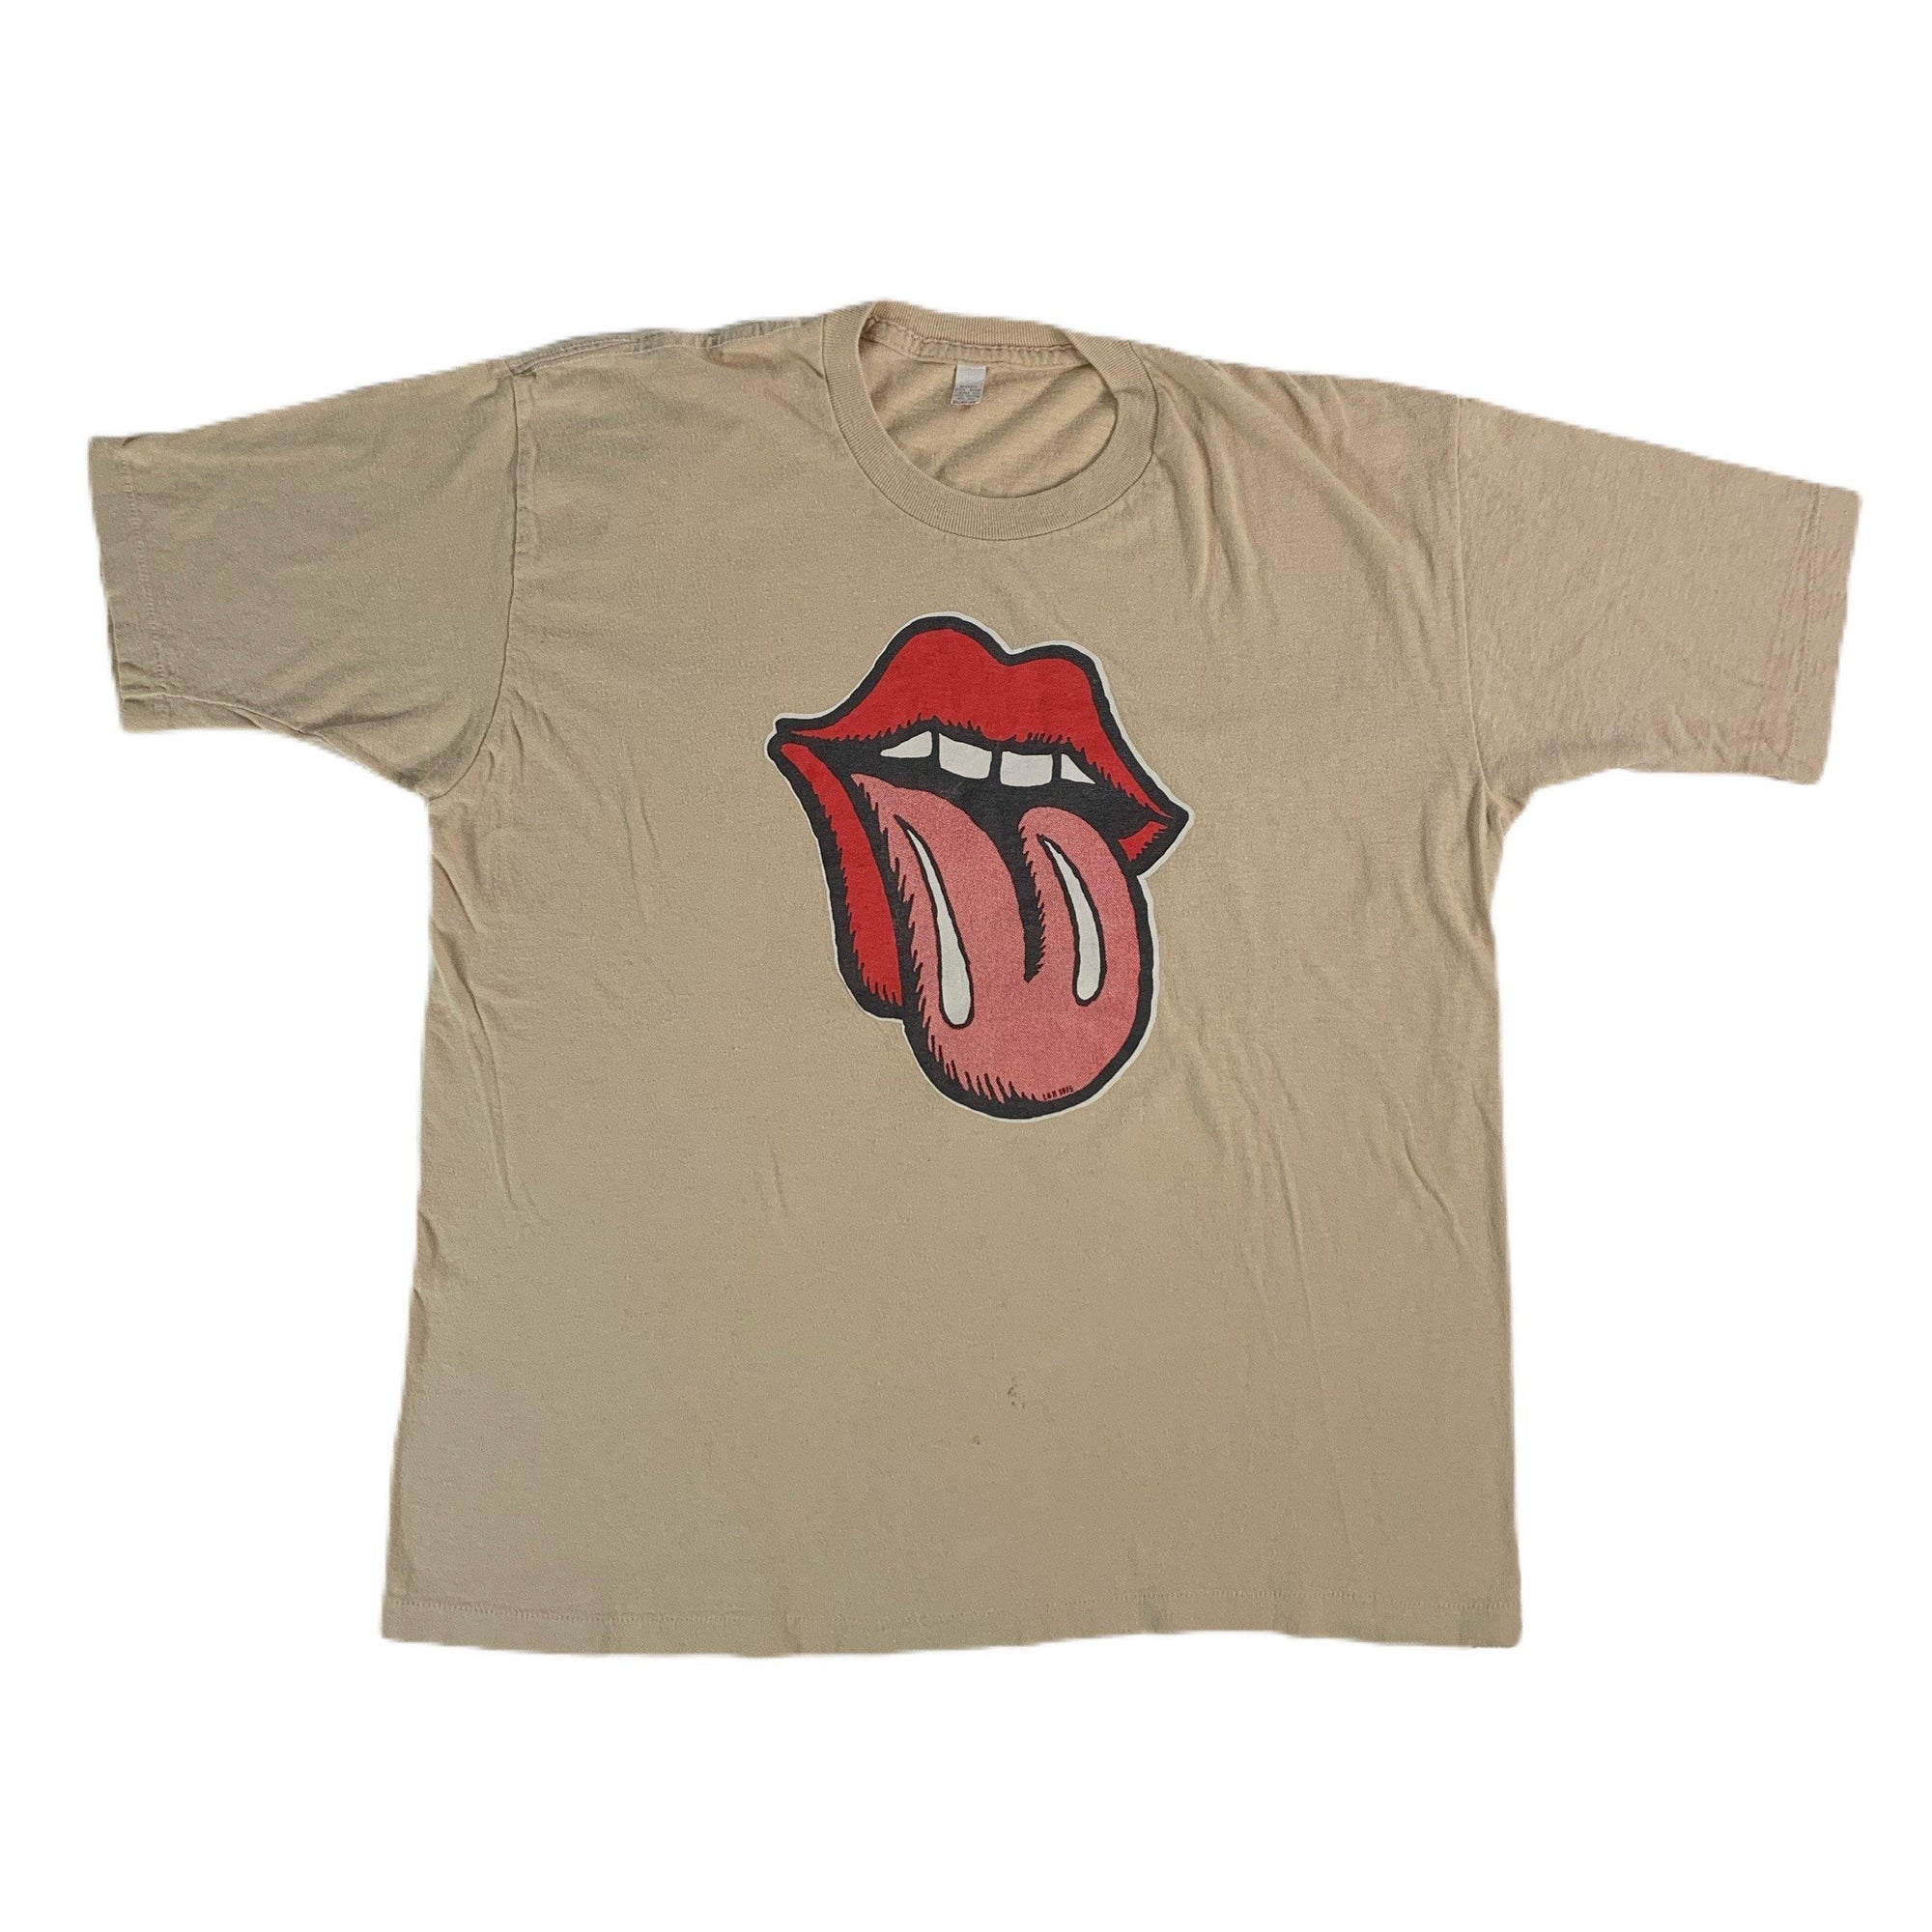 Vintage Rolling Stones "Tongue And Lip" T-Shirt - jointcustodydc